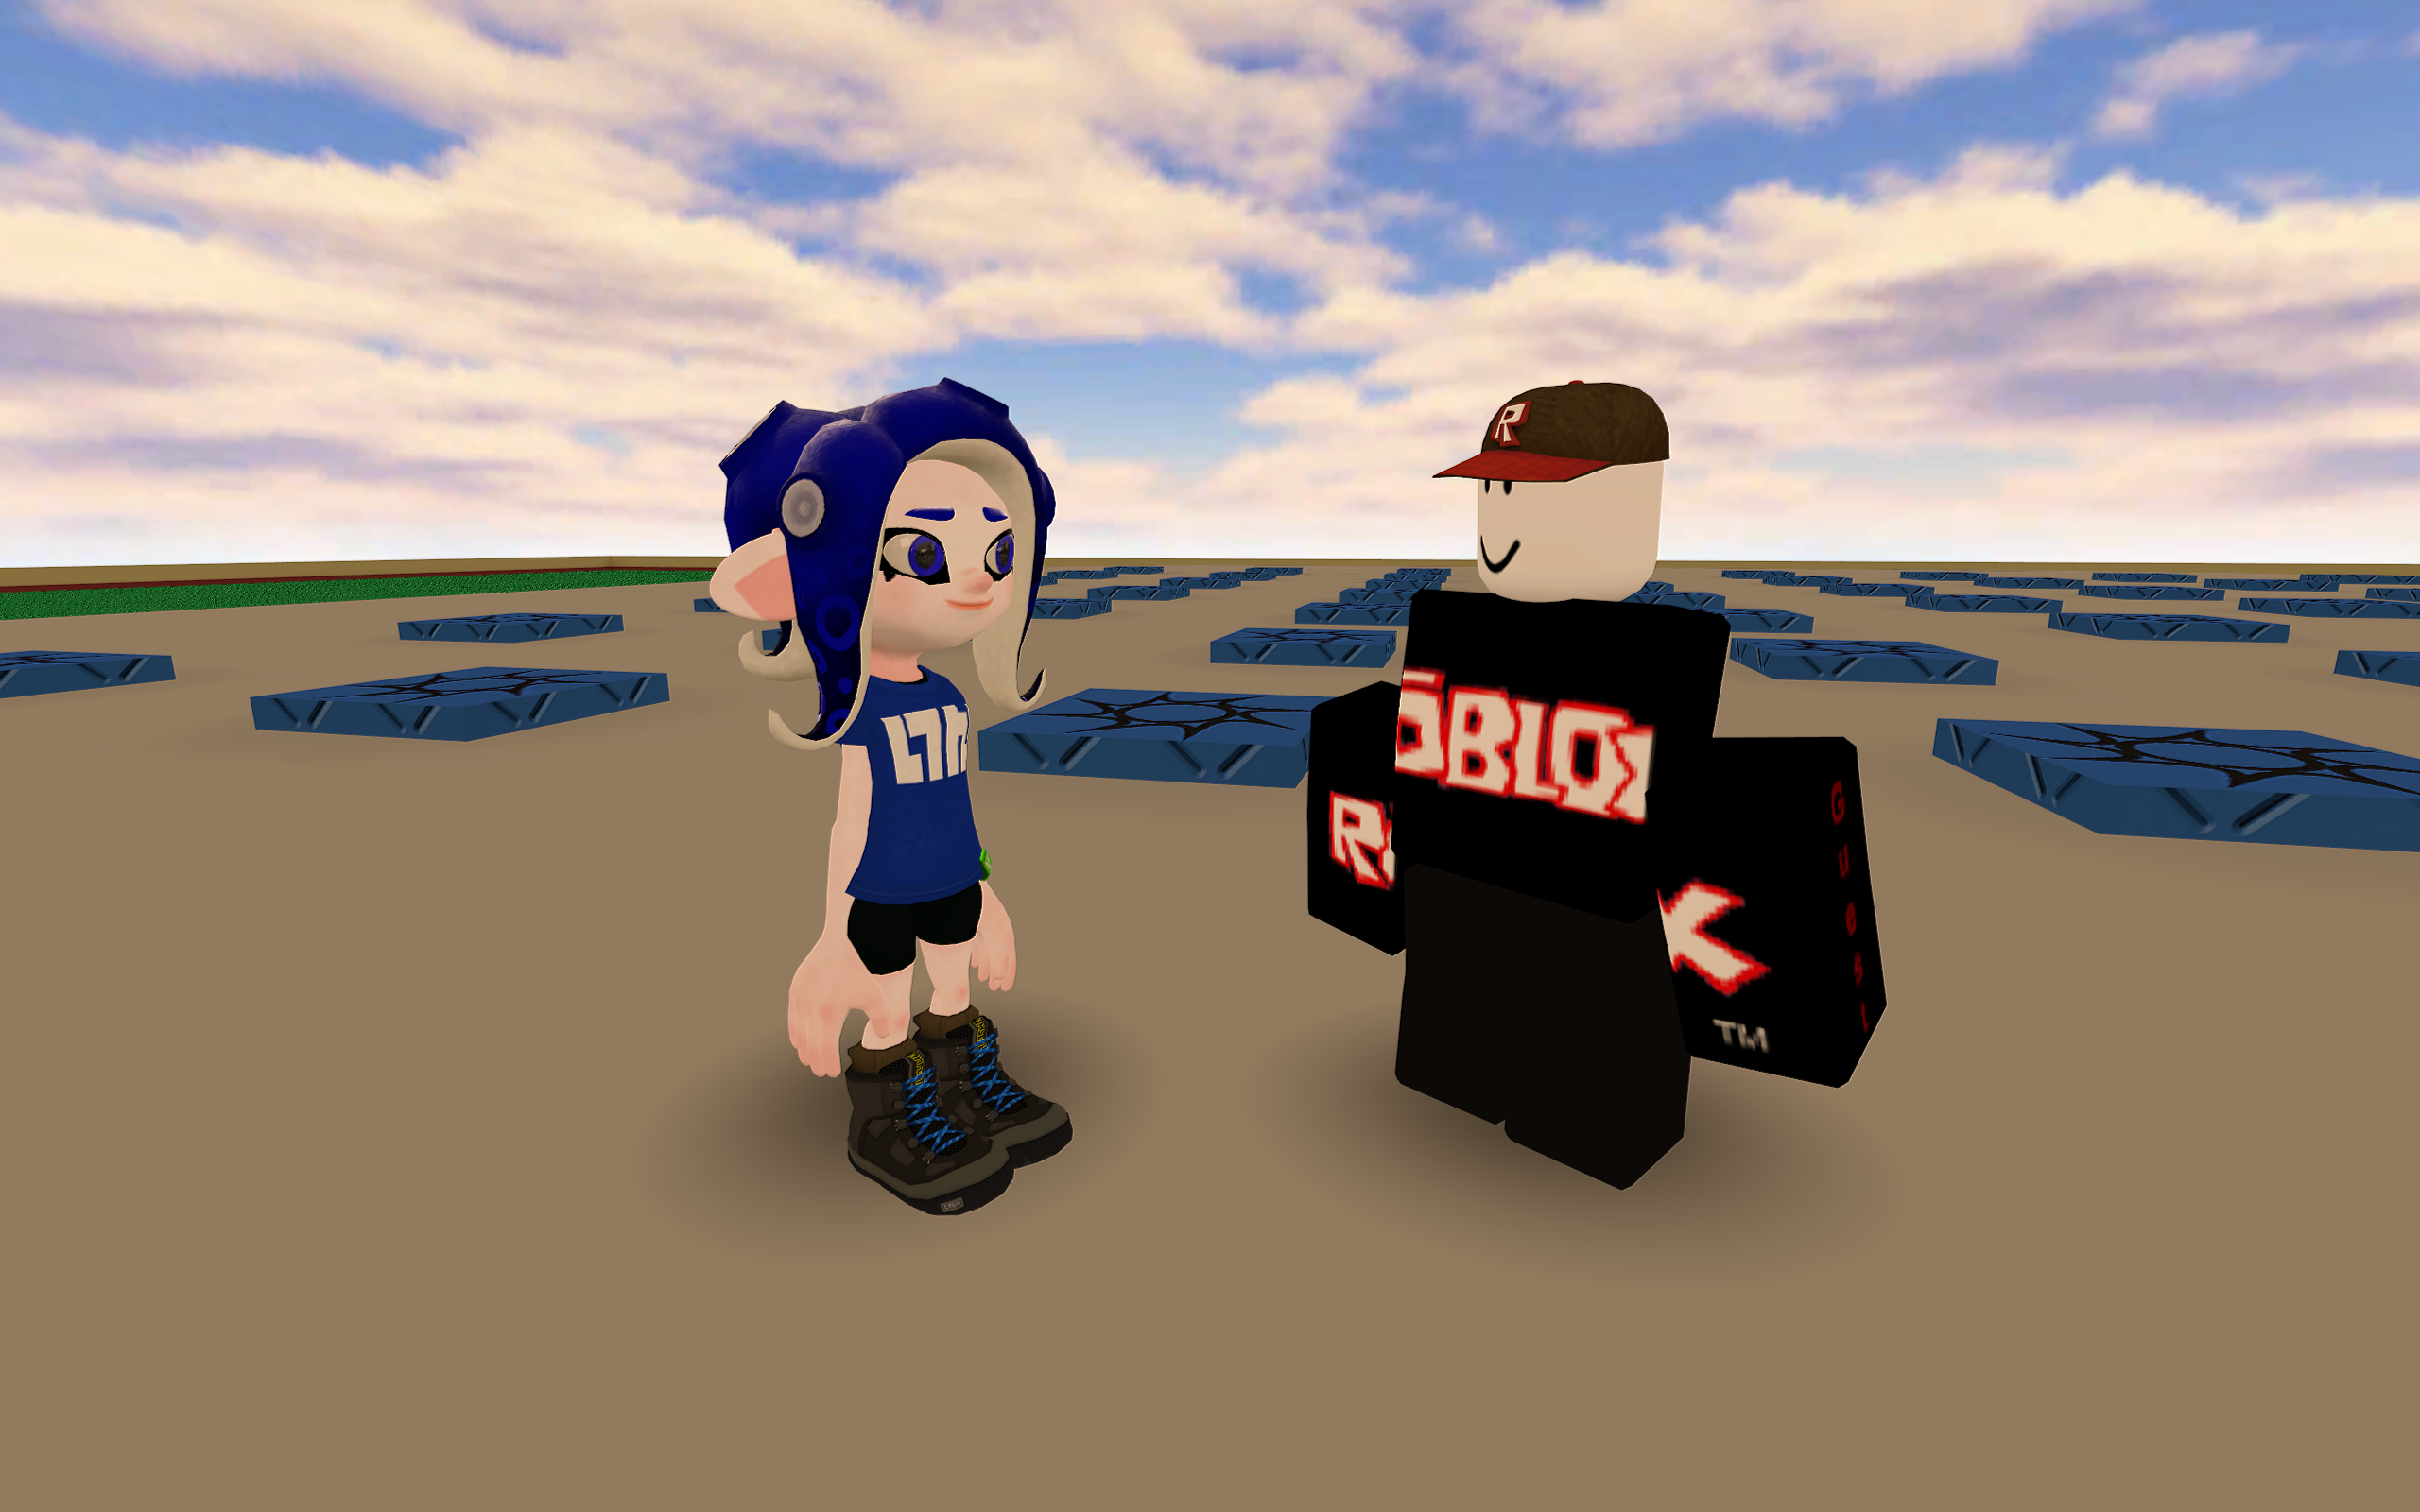 ATTACK OF GIANT GUESTS IN ROBLOX? 